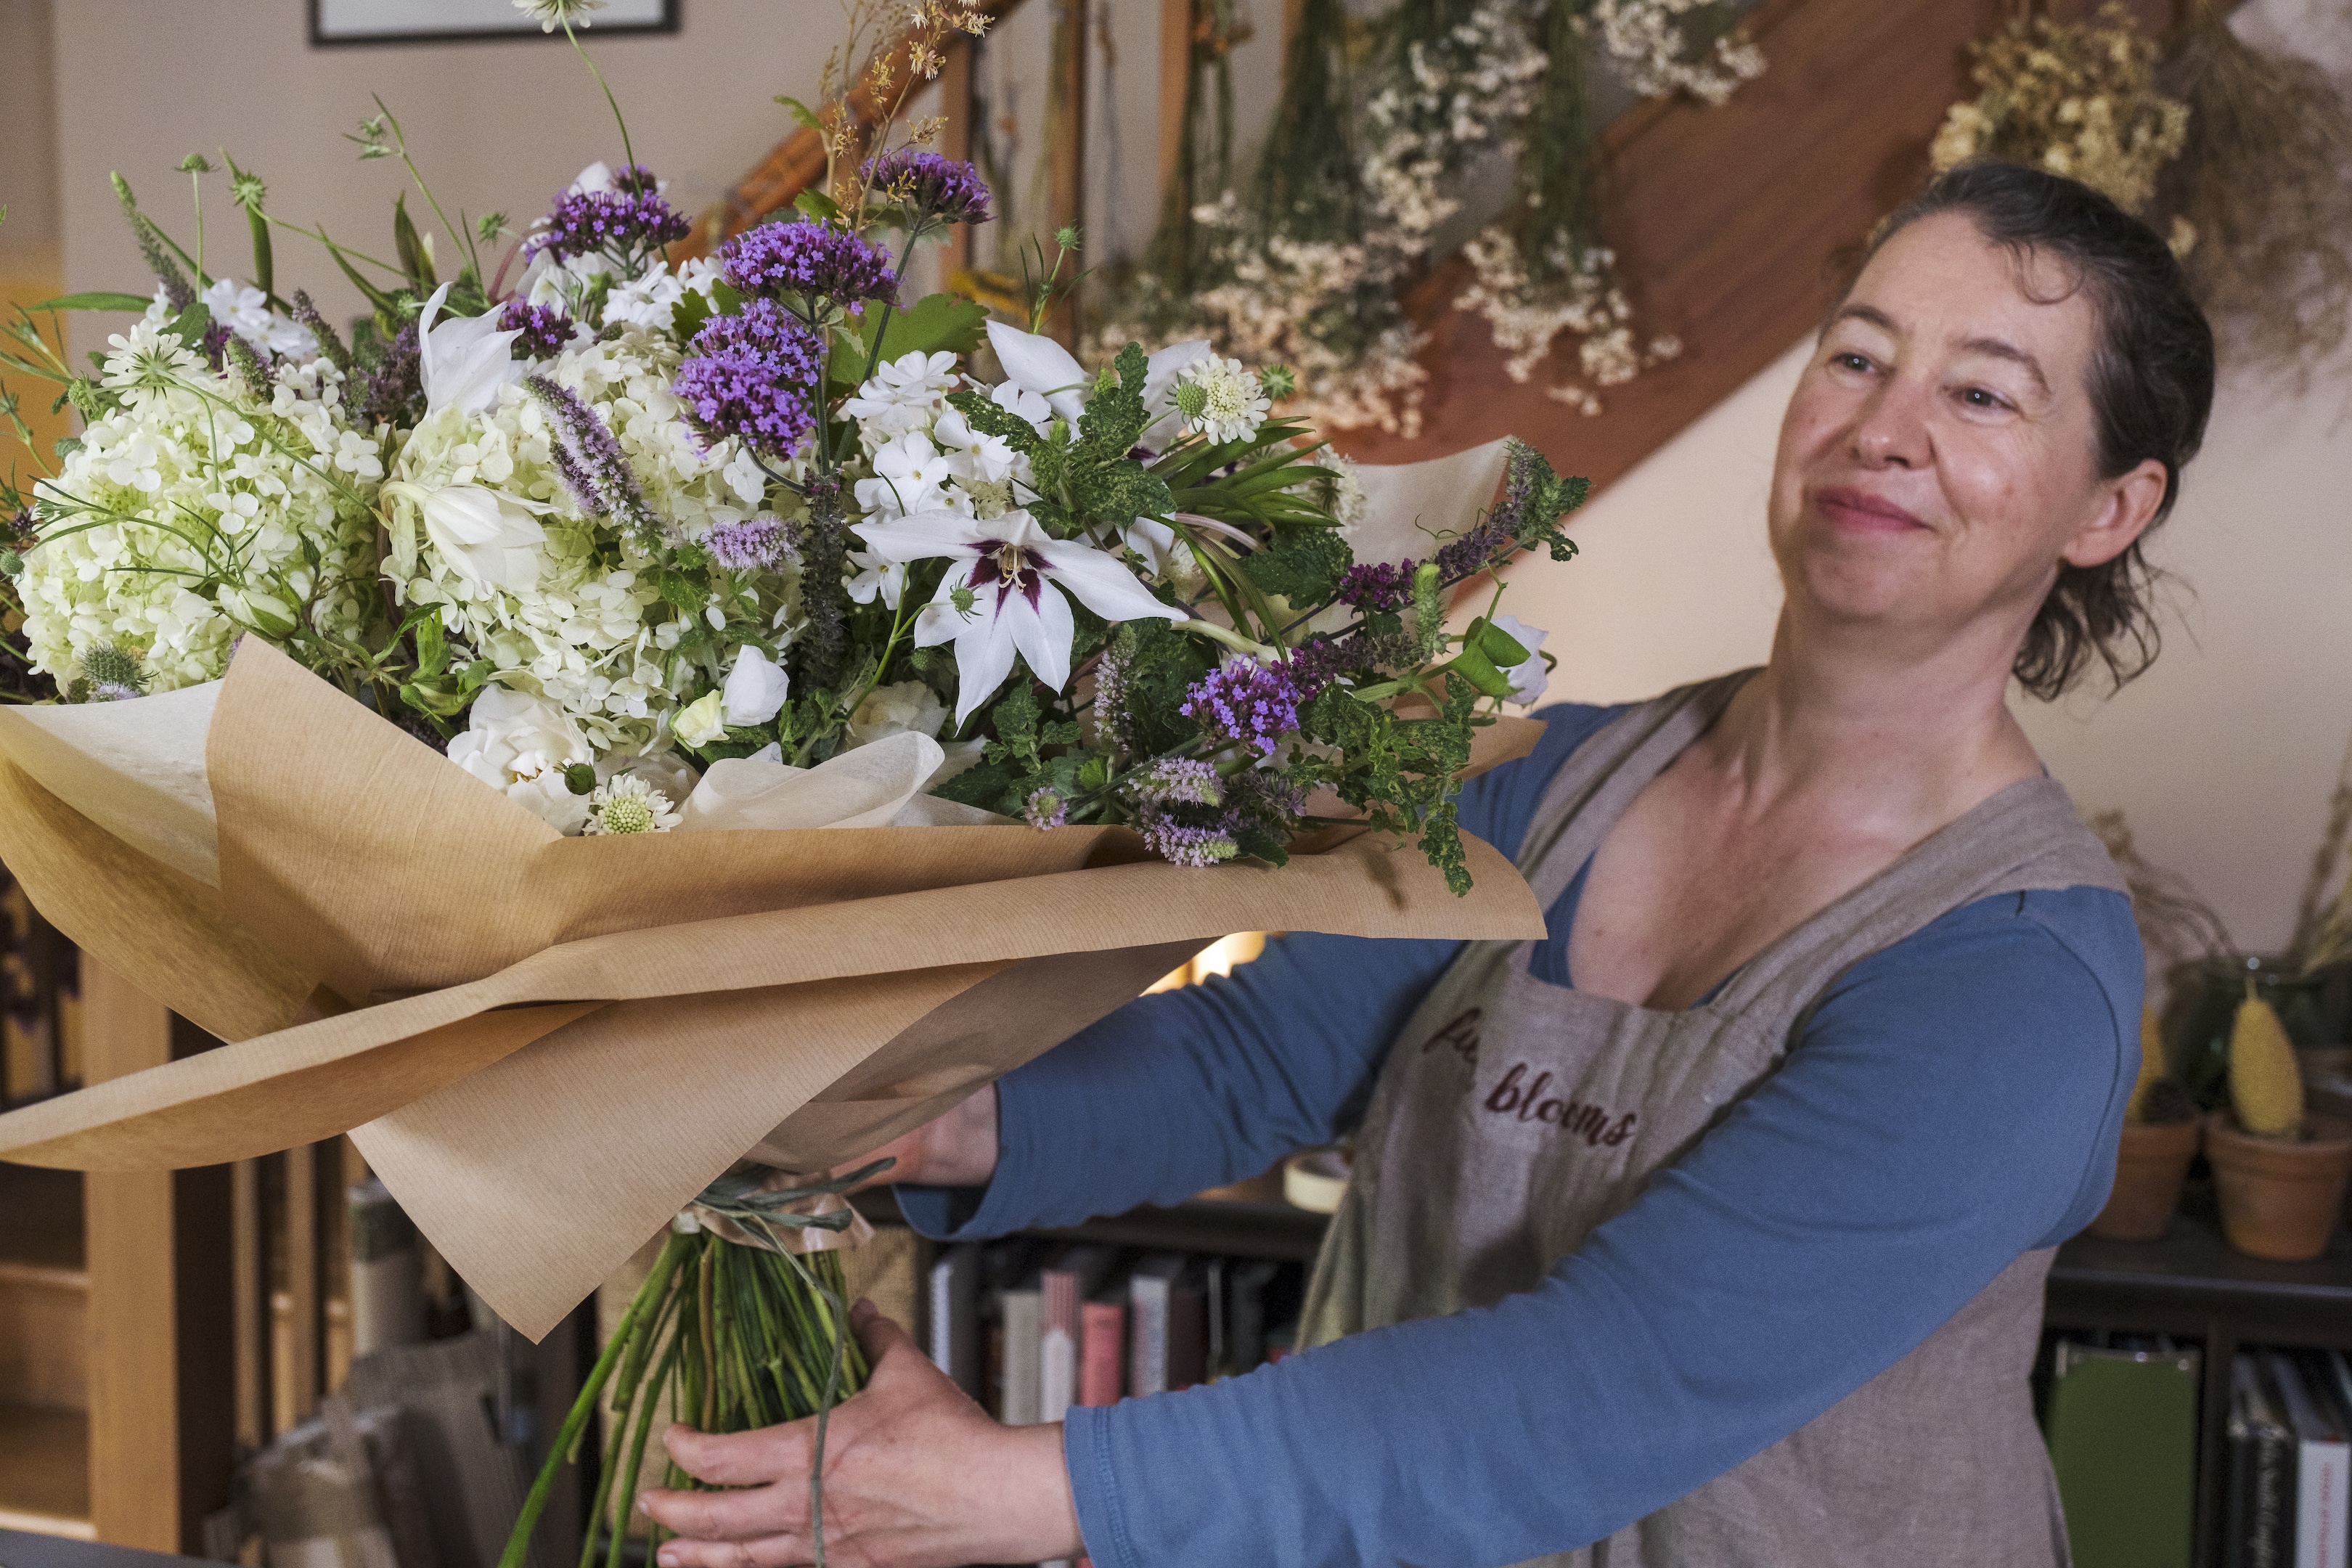 Featured image for “Make And Wrap A Large Sustainable Hand Tied Bouquet With Your Seasonal Flowers”